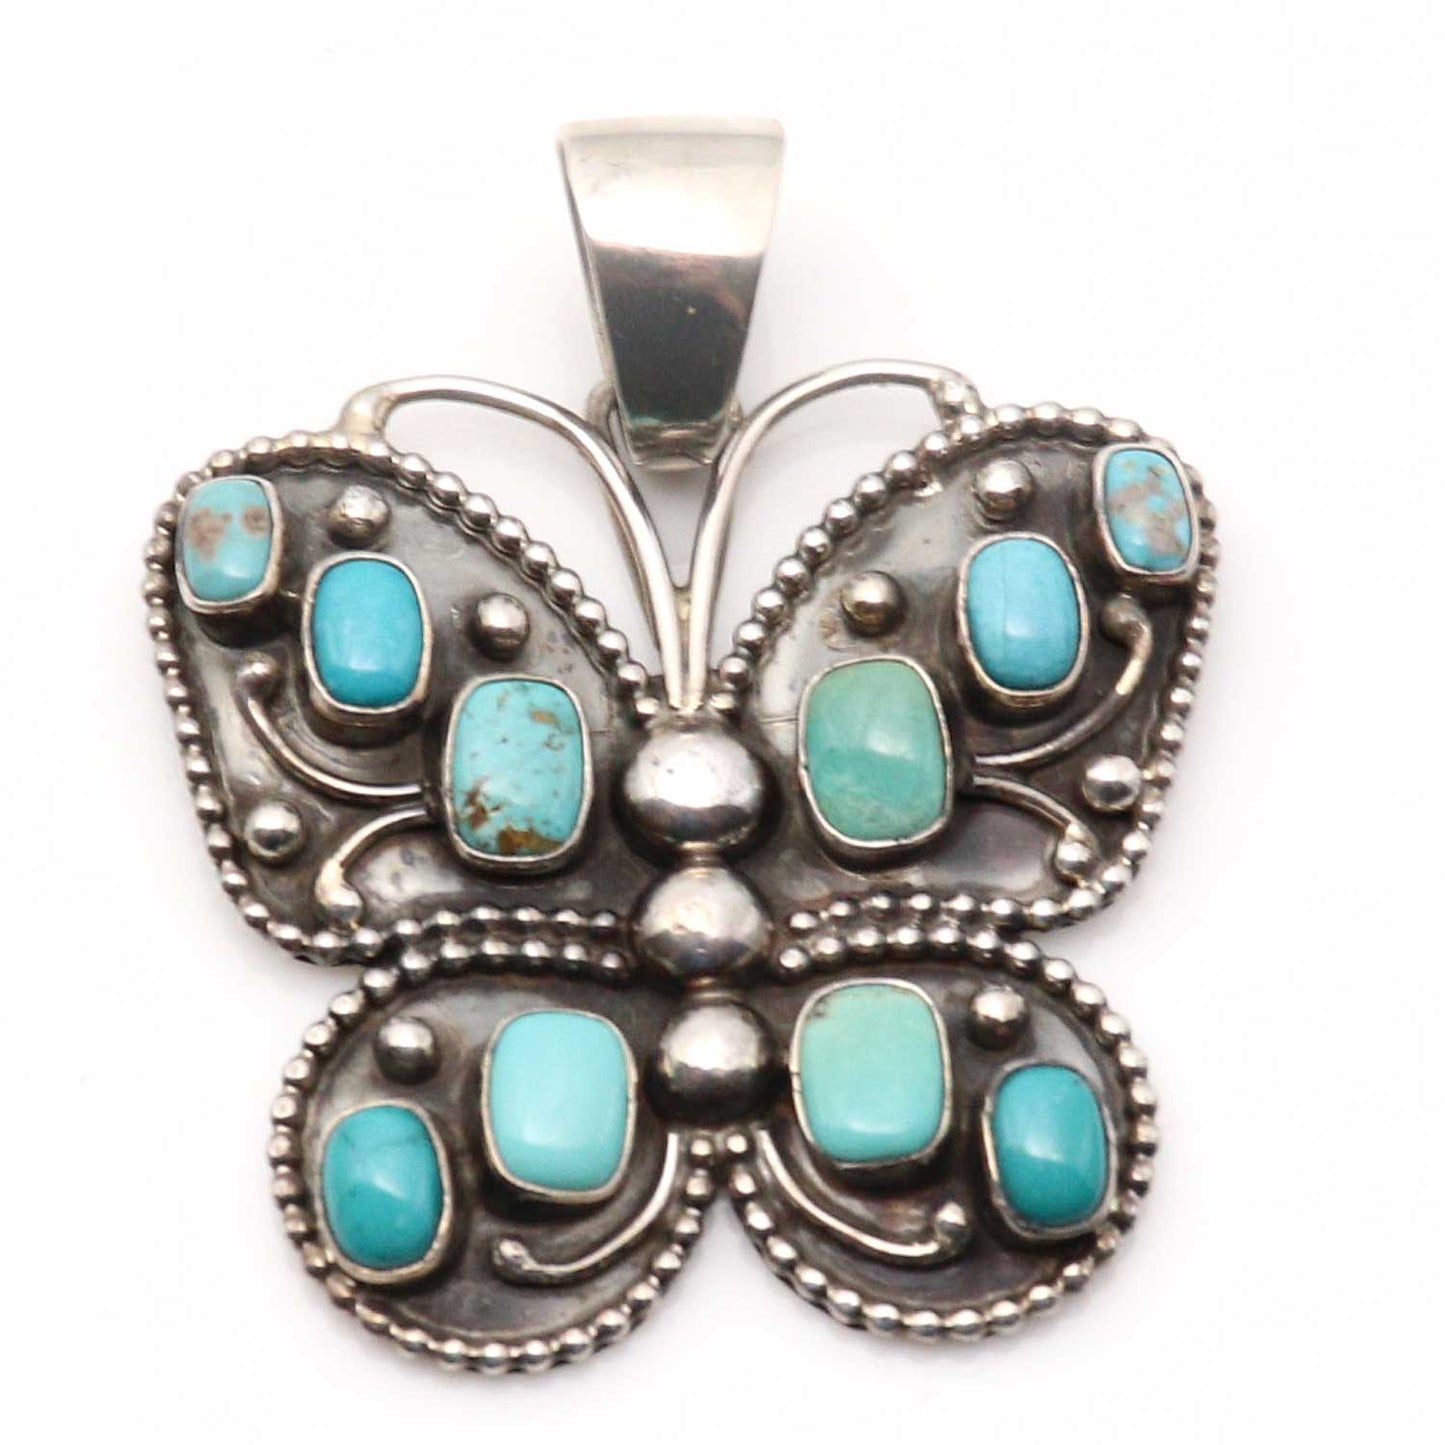 Load image into Gallery viewer, Butterfly Pendant
